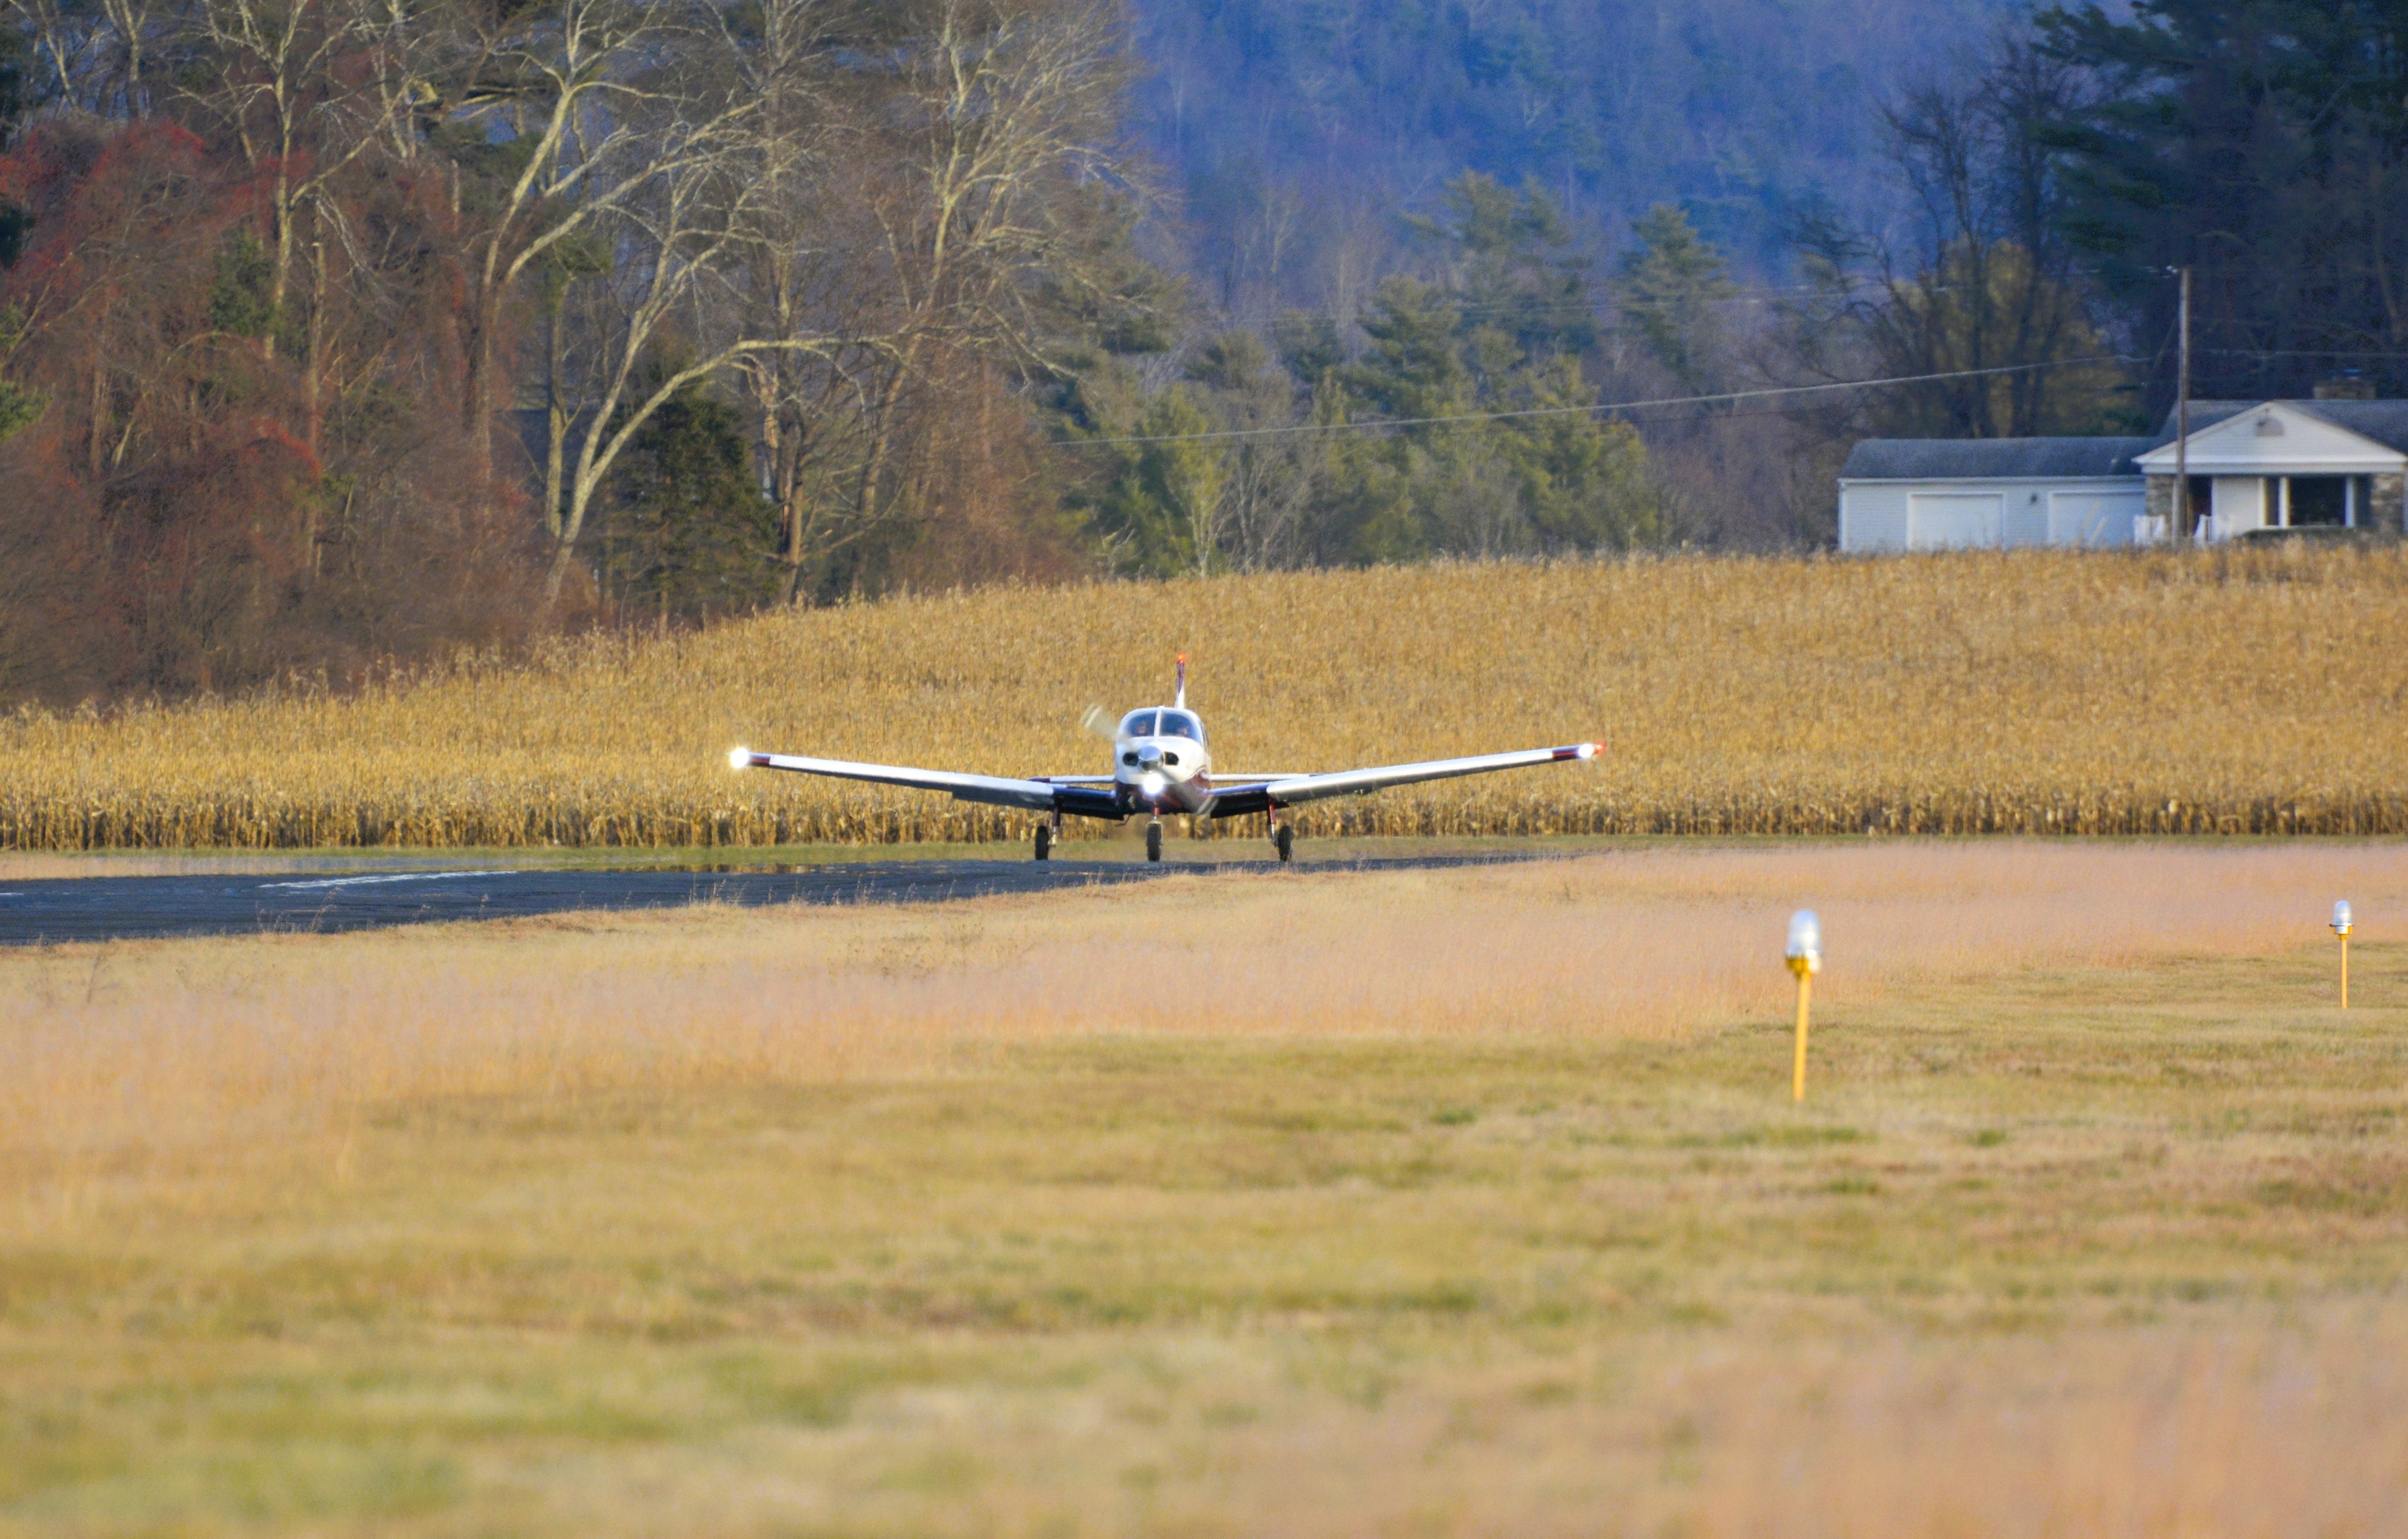 As Great Barrington Airport ignores some special-permit conditions, the town's government takes no action